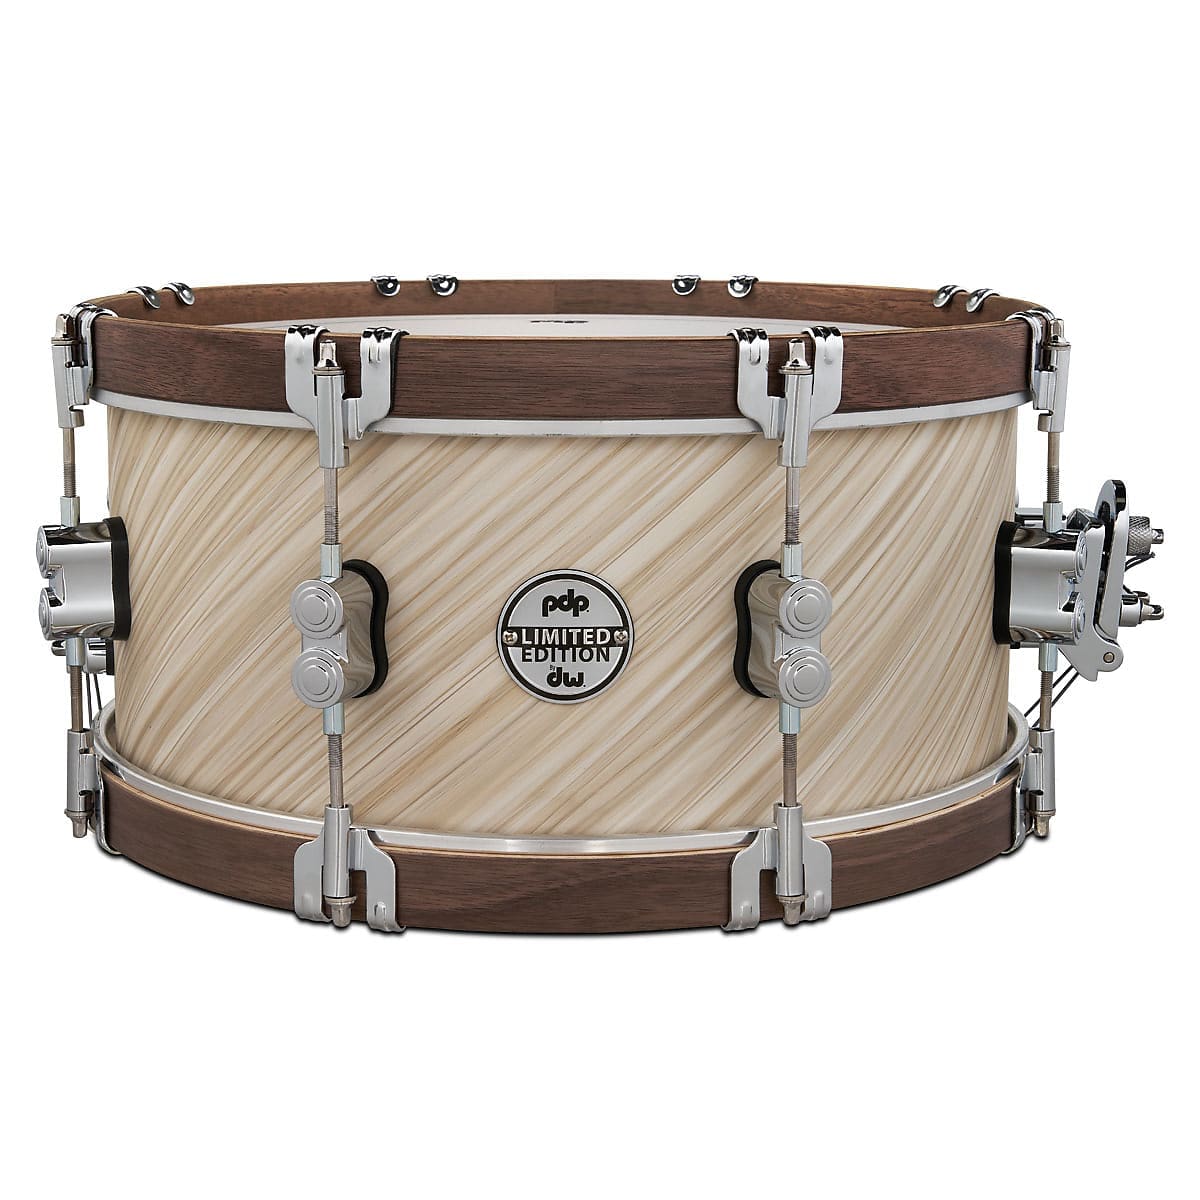 6.5 x 14 inch Twisted Ivory PDP Limited Edition Snare Drum 